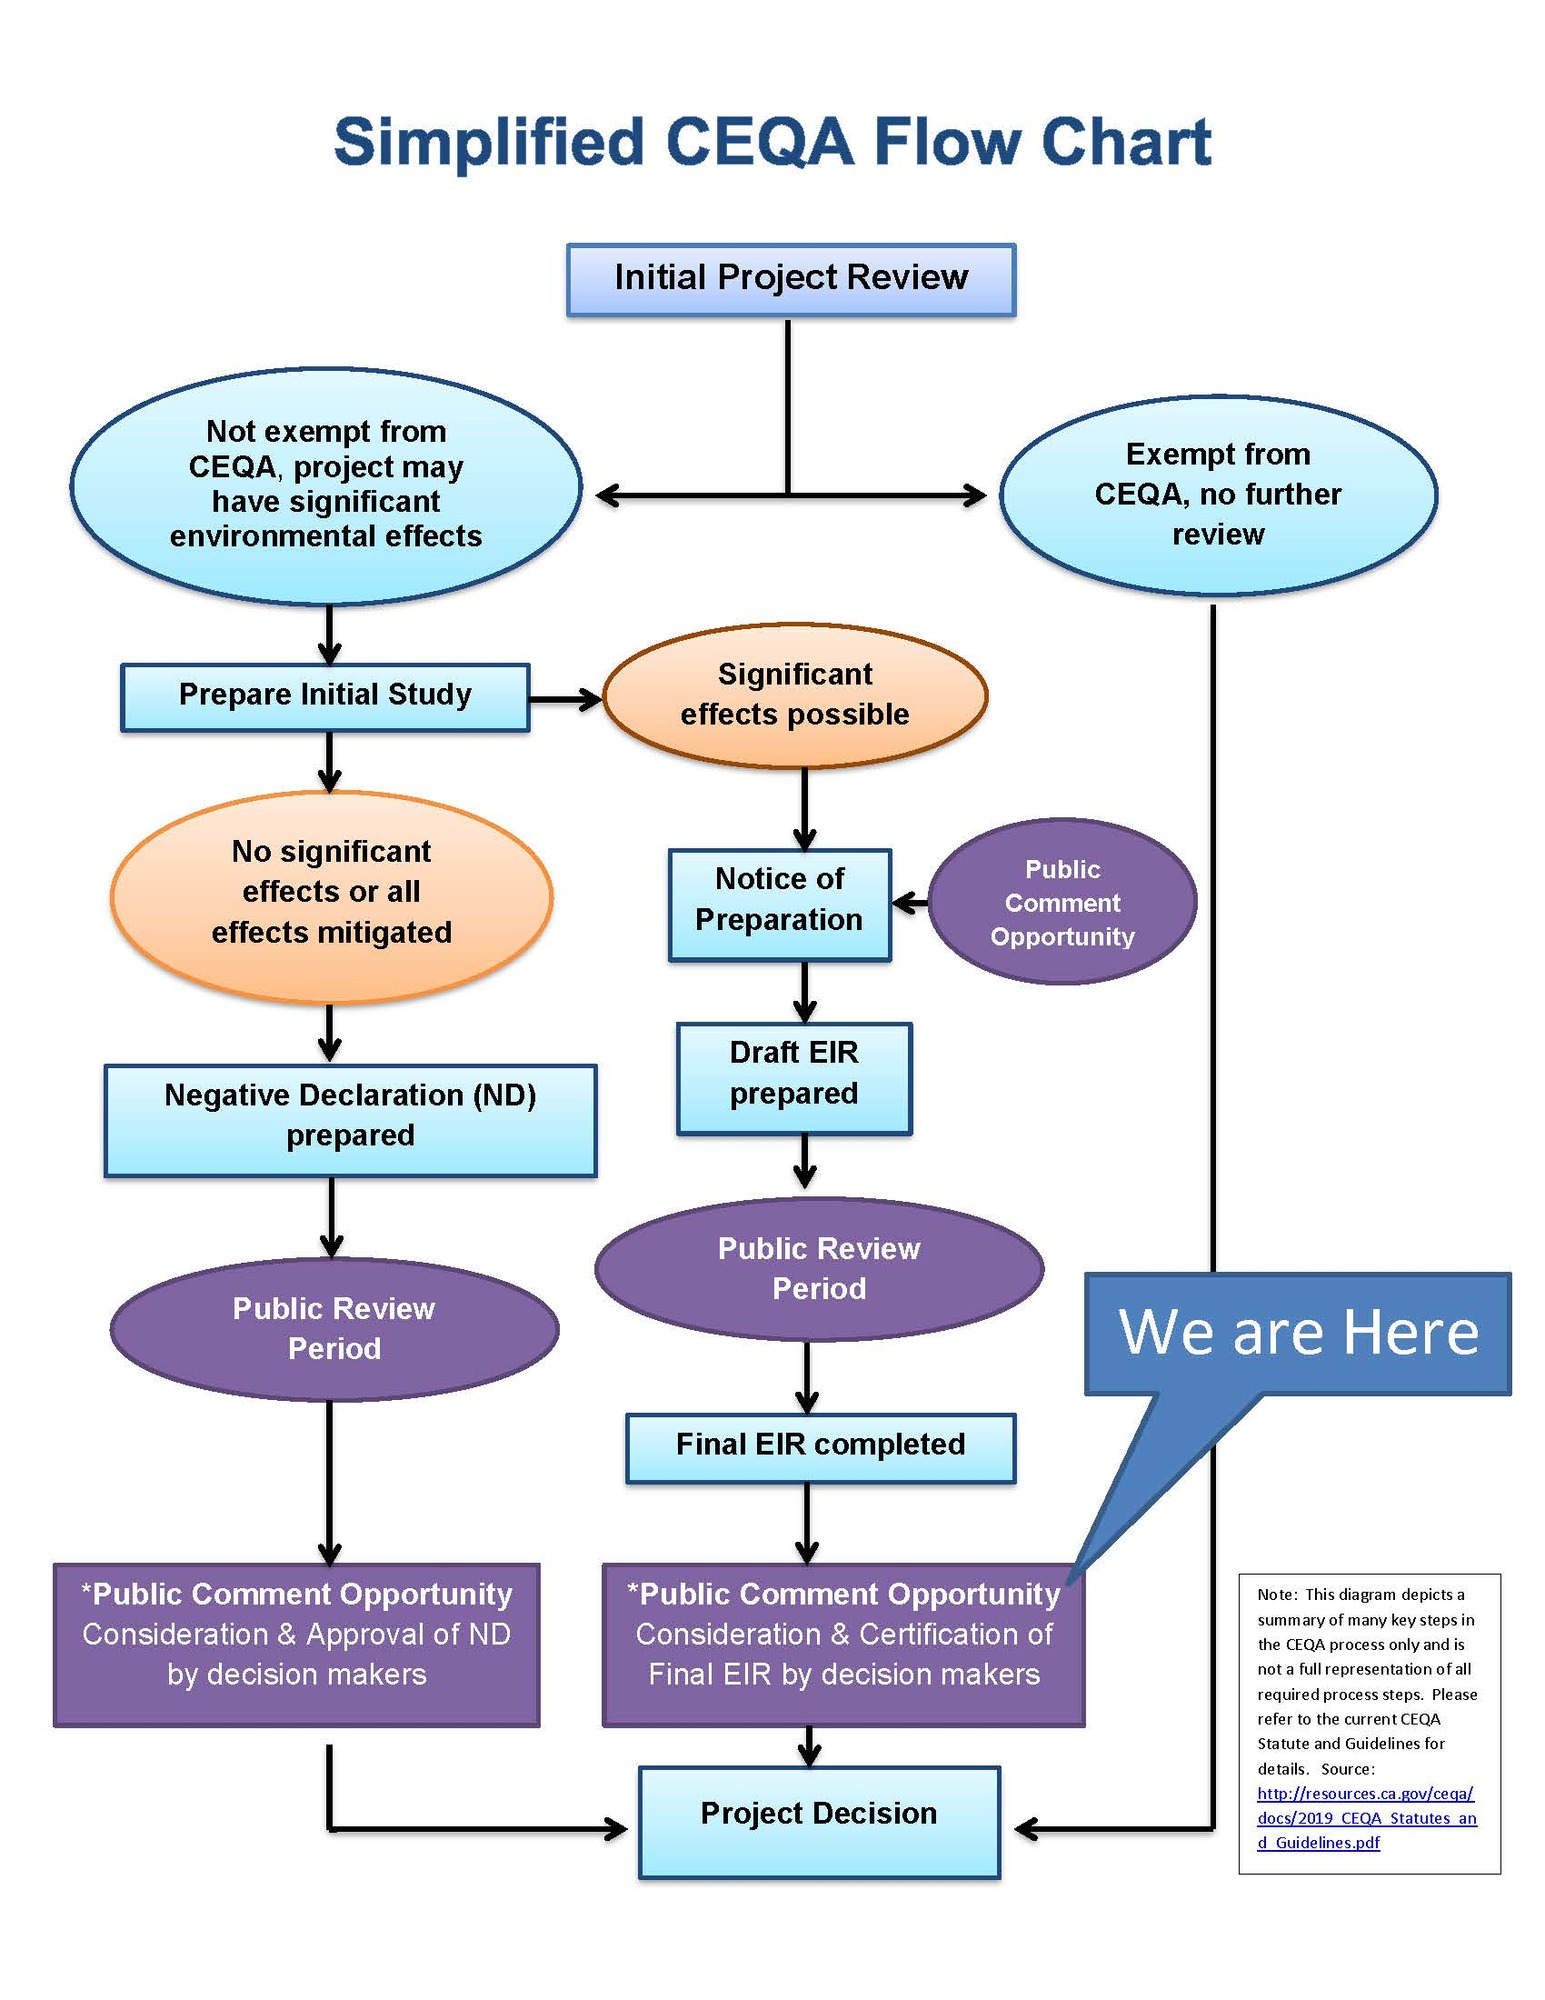 Simplified CEQA Flow Chart_TRP pic